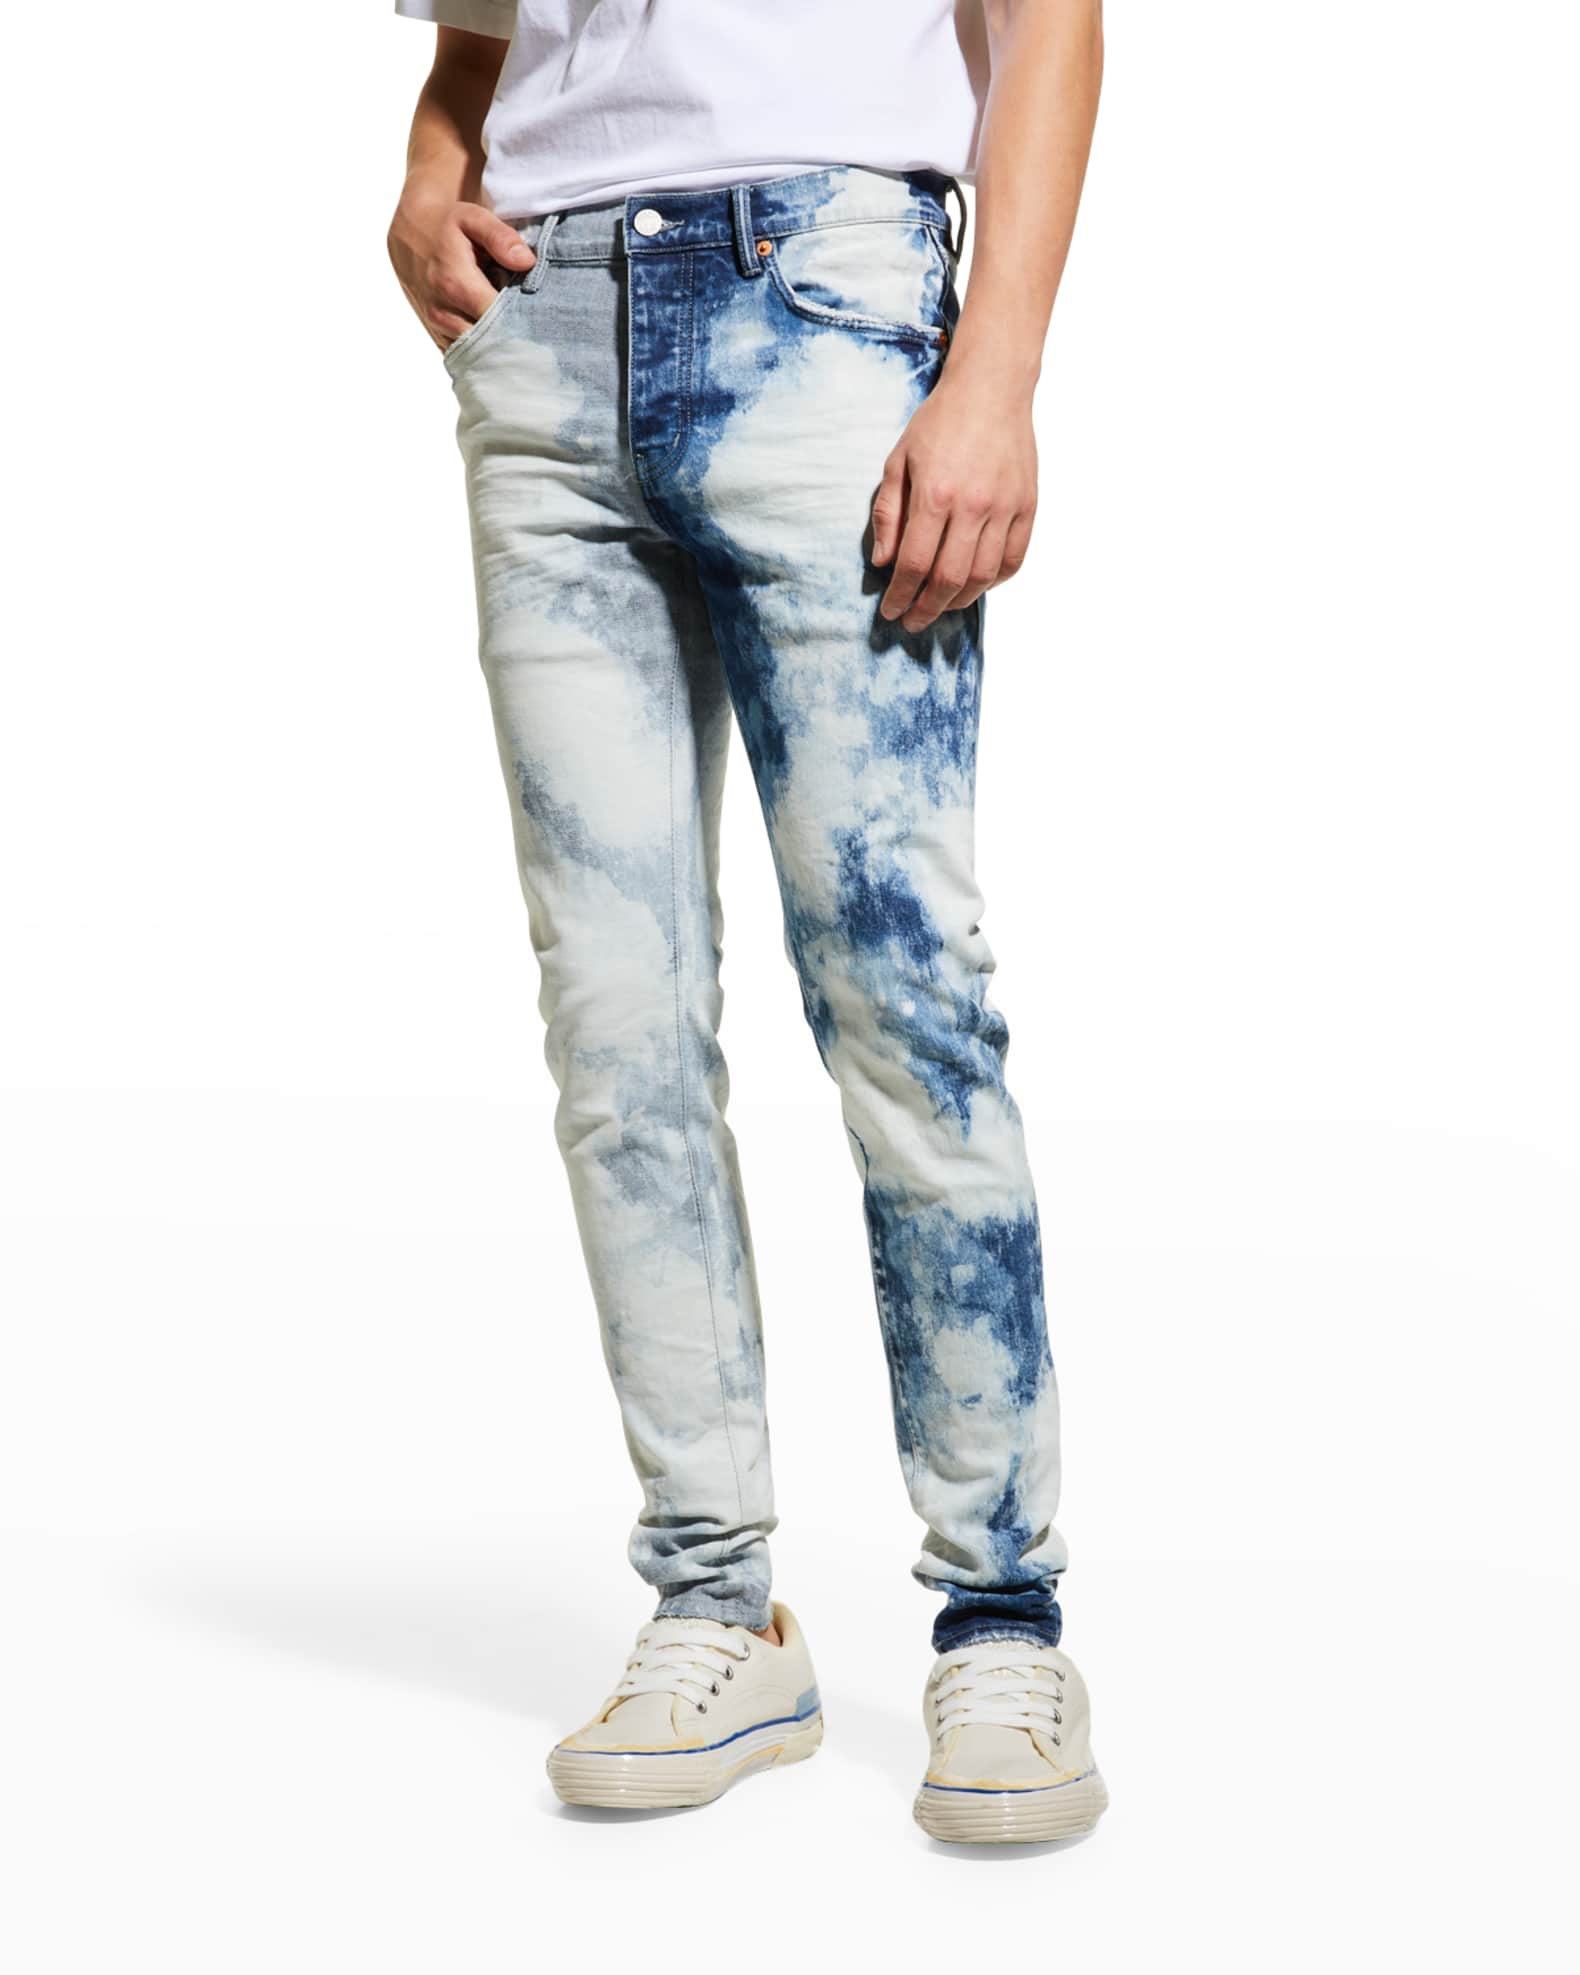 PURPLE Over-Bleached Skinny Jeans | Marcus